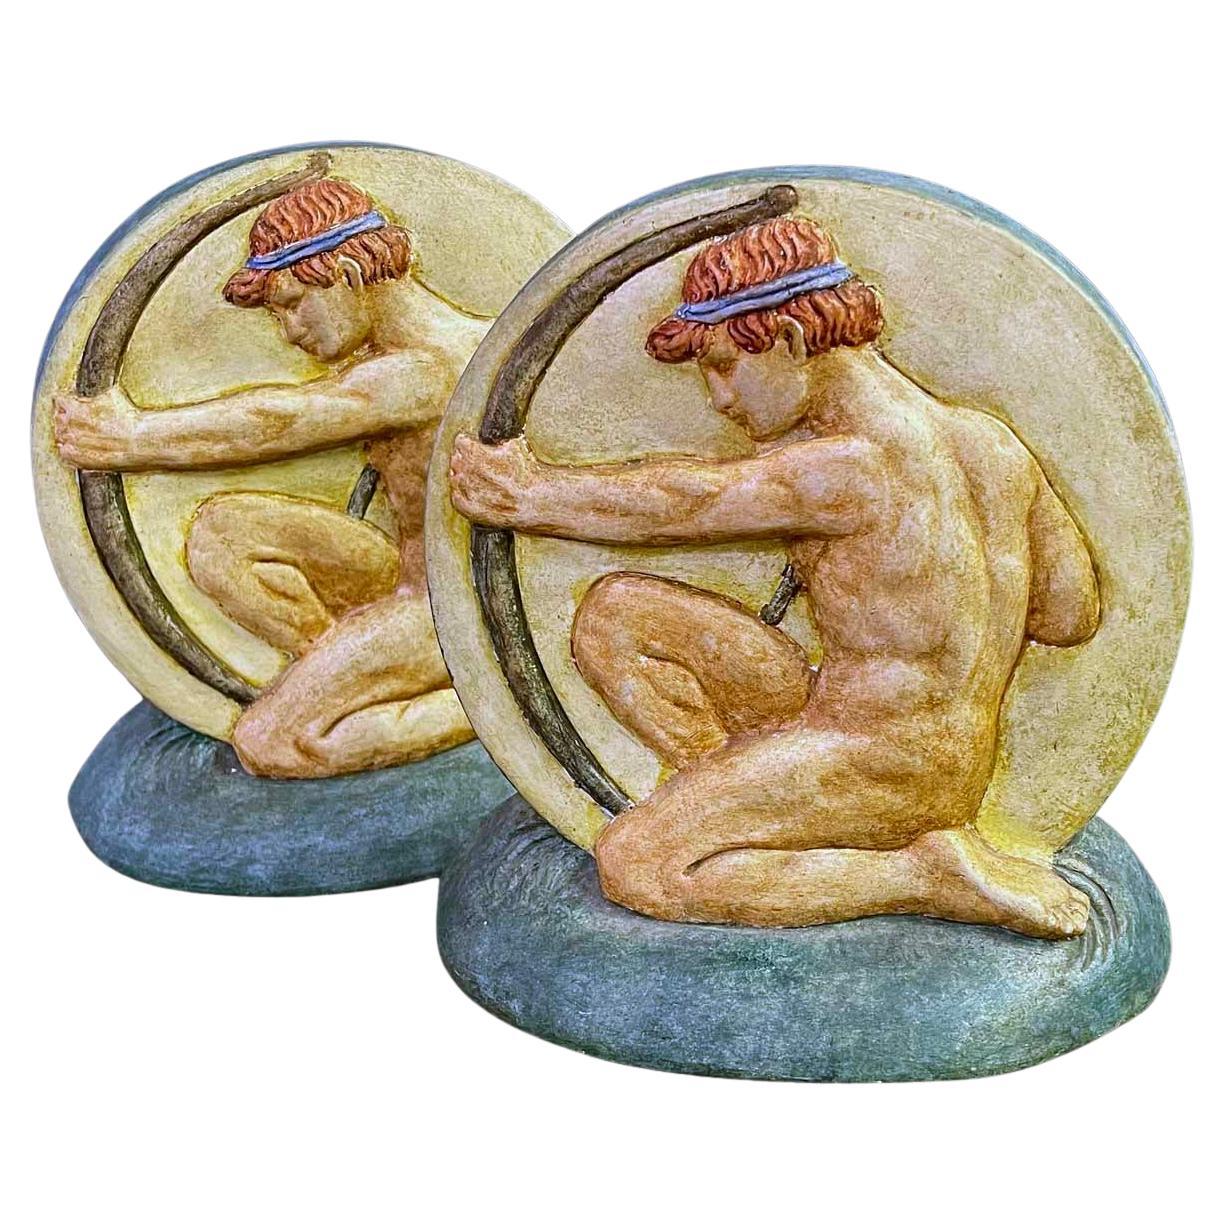 "Nude Male Archer Bookends", Rare Pair of Ceramic, Arts and Crafts Sculptures For Sale